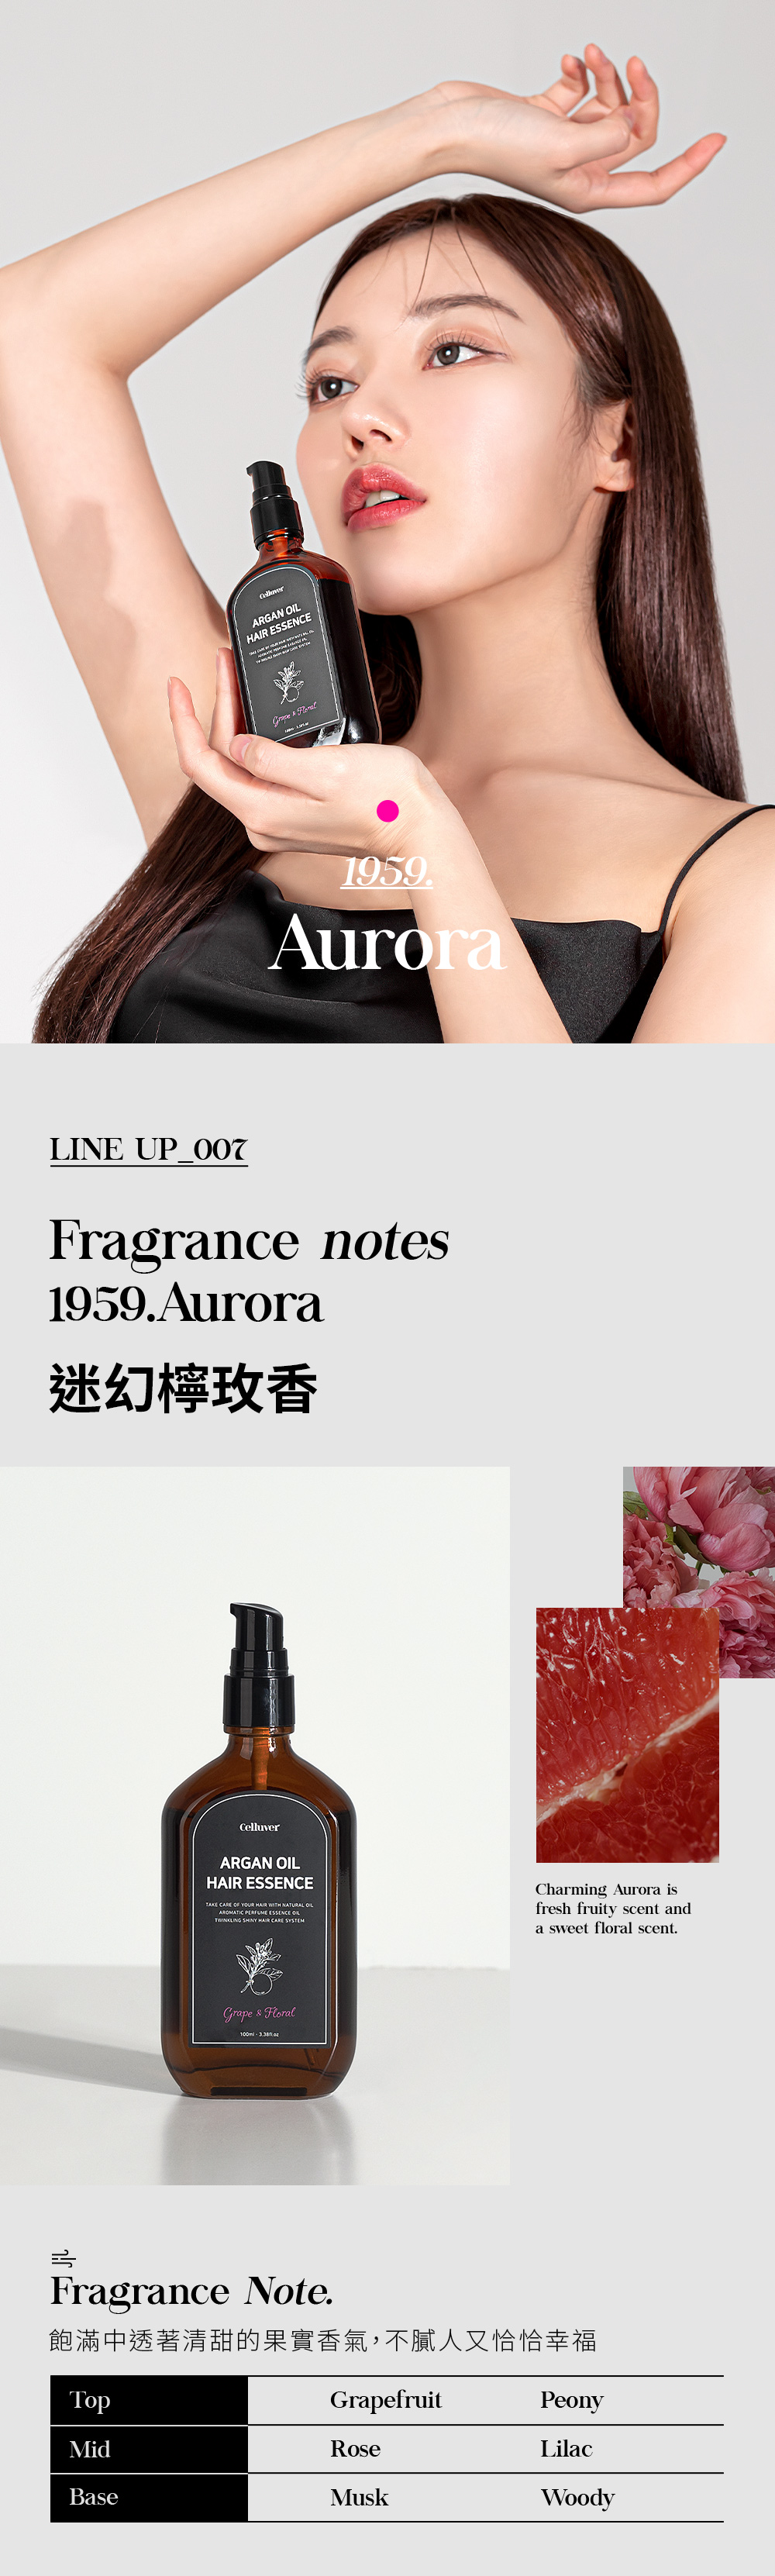 ARGAN HAIR ESSENCE  199AuroraLINE Fragrance notes1959Aurora迷幻檸香CelluverARGAN HAIR ESSENCETAKE CARE OF YOUR HAIR WITH NATURAL OILAROMATIC PERFUME ESSENCE OIL SHINY HAIR CARE SYSTEMCharming Aurora isfresh fruity scent anda sweet floral scent.Grape  Floral  5Fragrance Note.飽滿中透著清甜的果實香氣,不膩人又恰恰幸福TopGrapefruitPeonyMidRoseLilacBaseMuskWoody